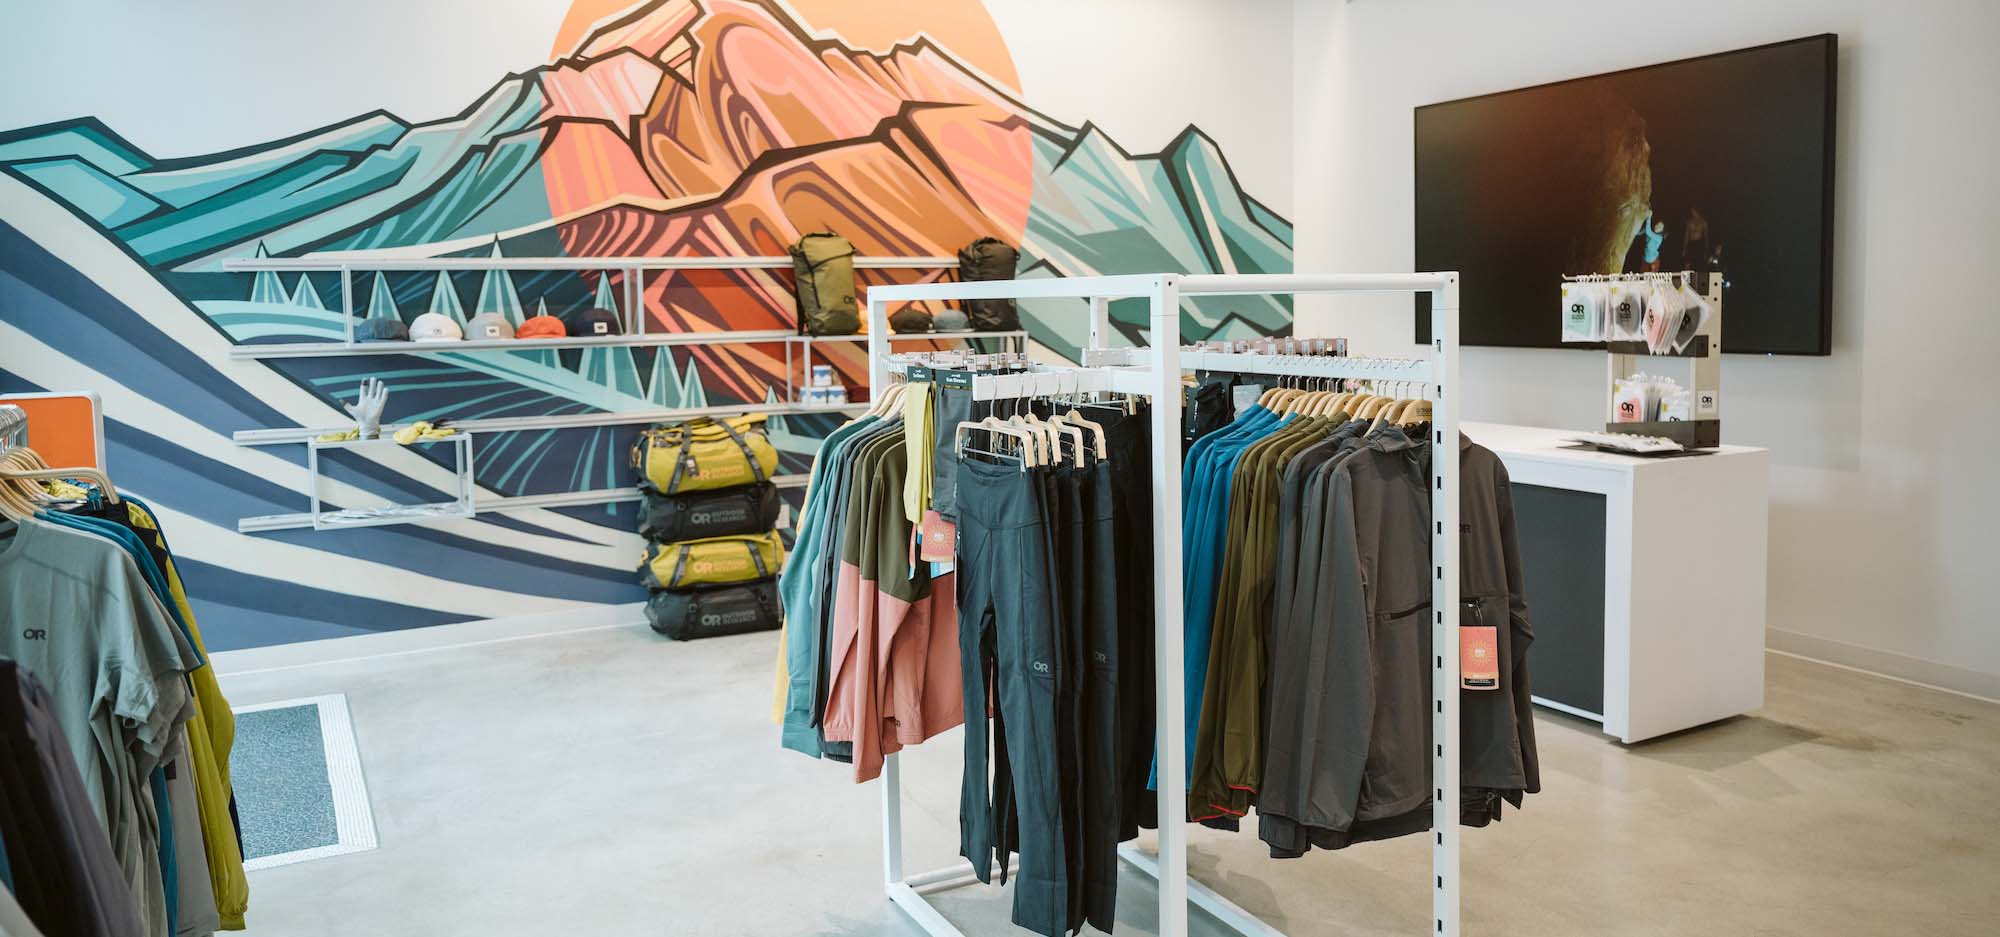 Inside an outdoor clothing shop with a mountain mural in the background on the wall.